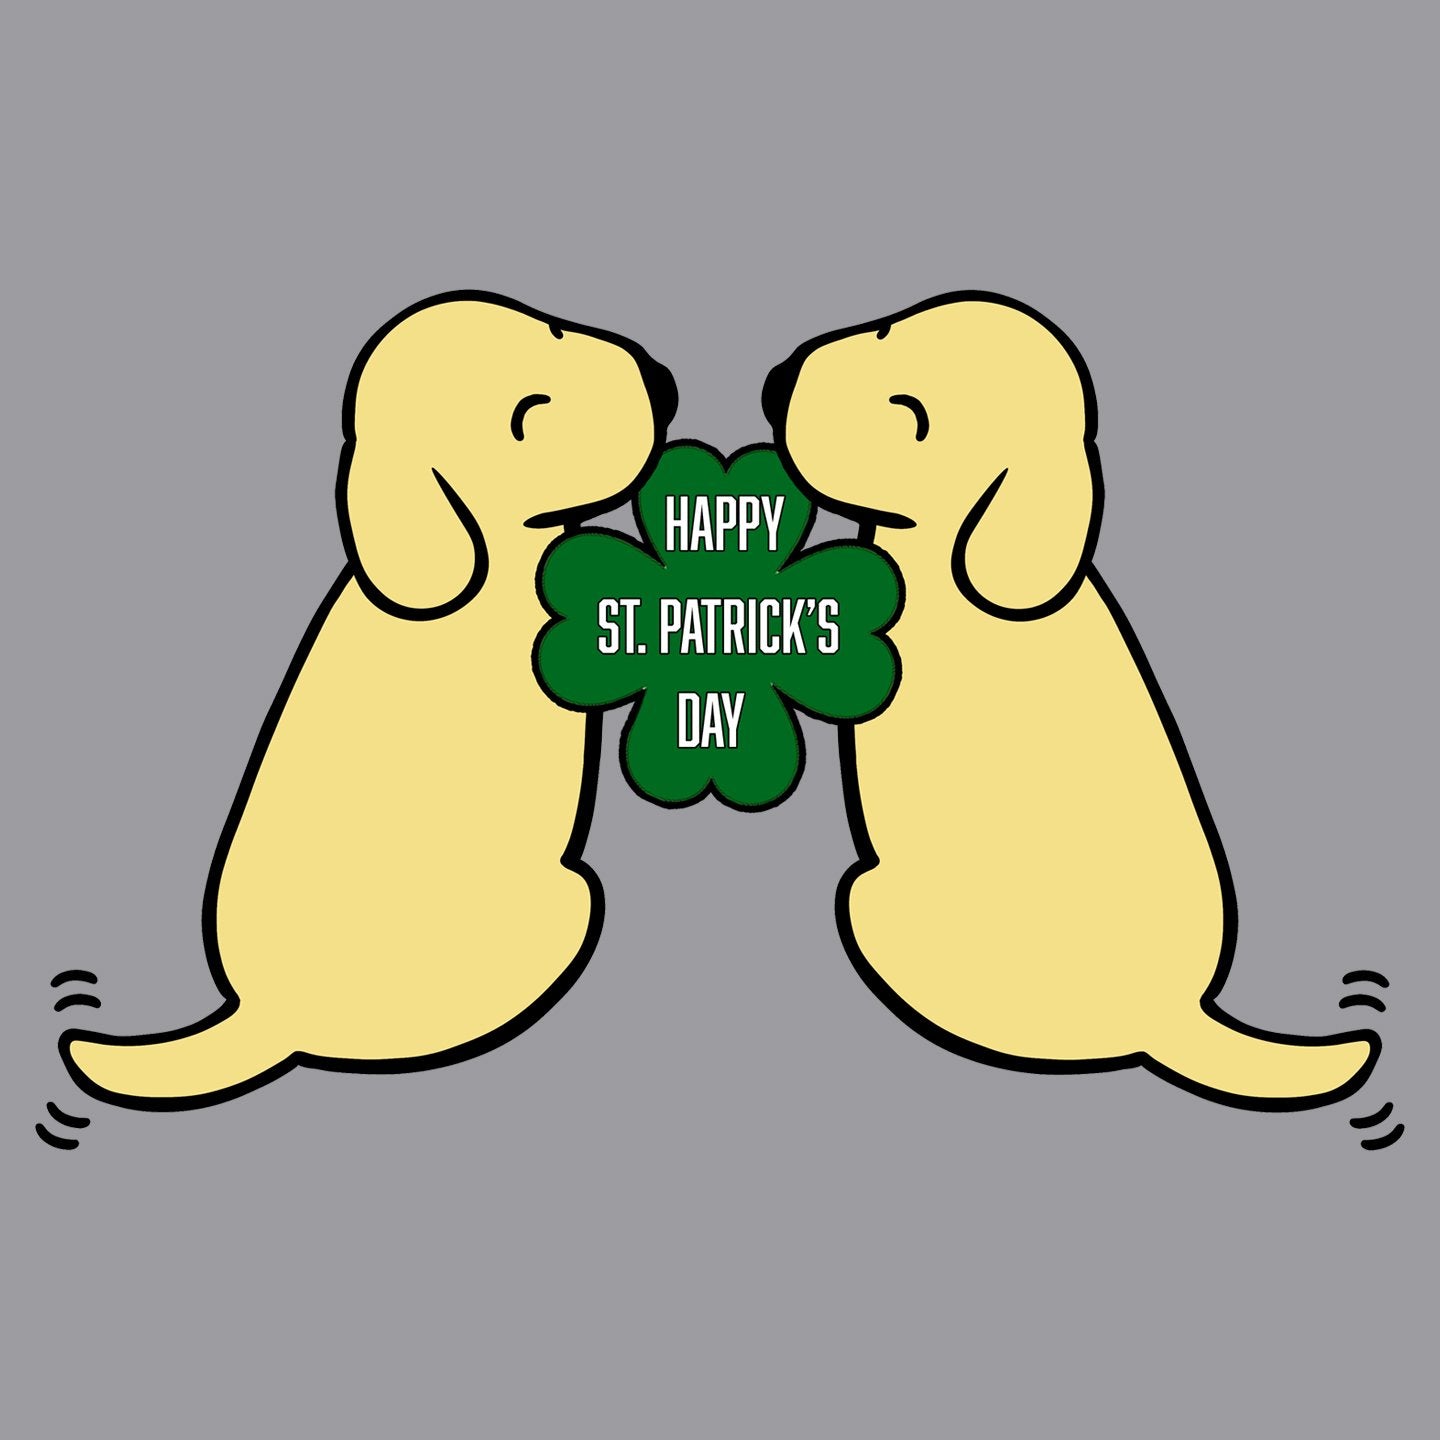 Happy St. Patrick's Day Yellow Lab Puppies - Adult Adjustable Face Mask